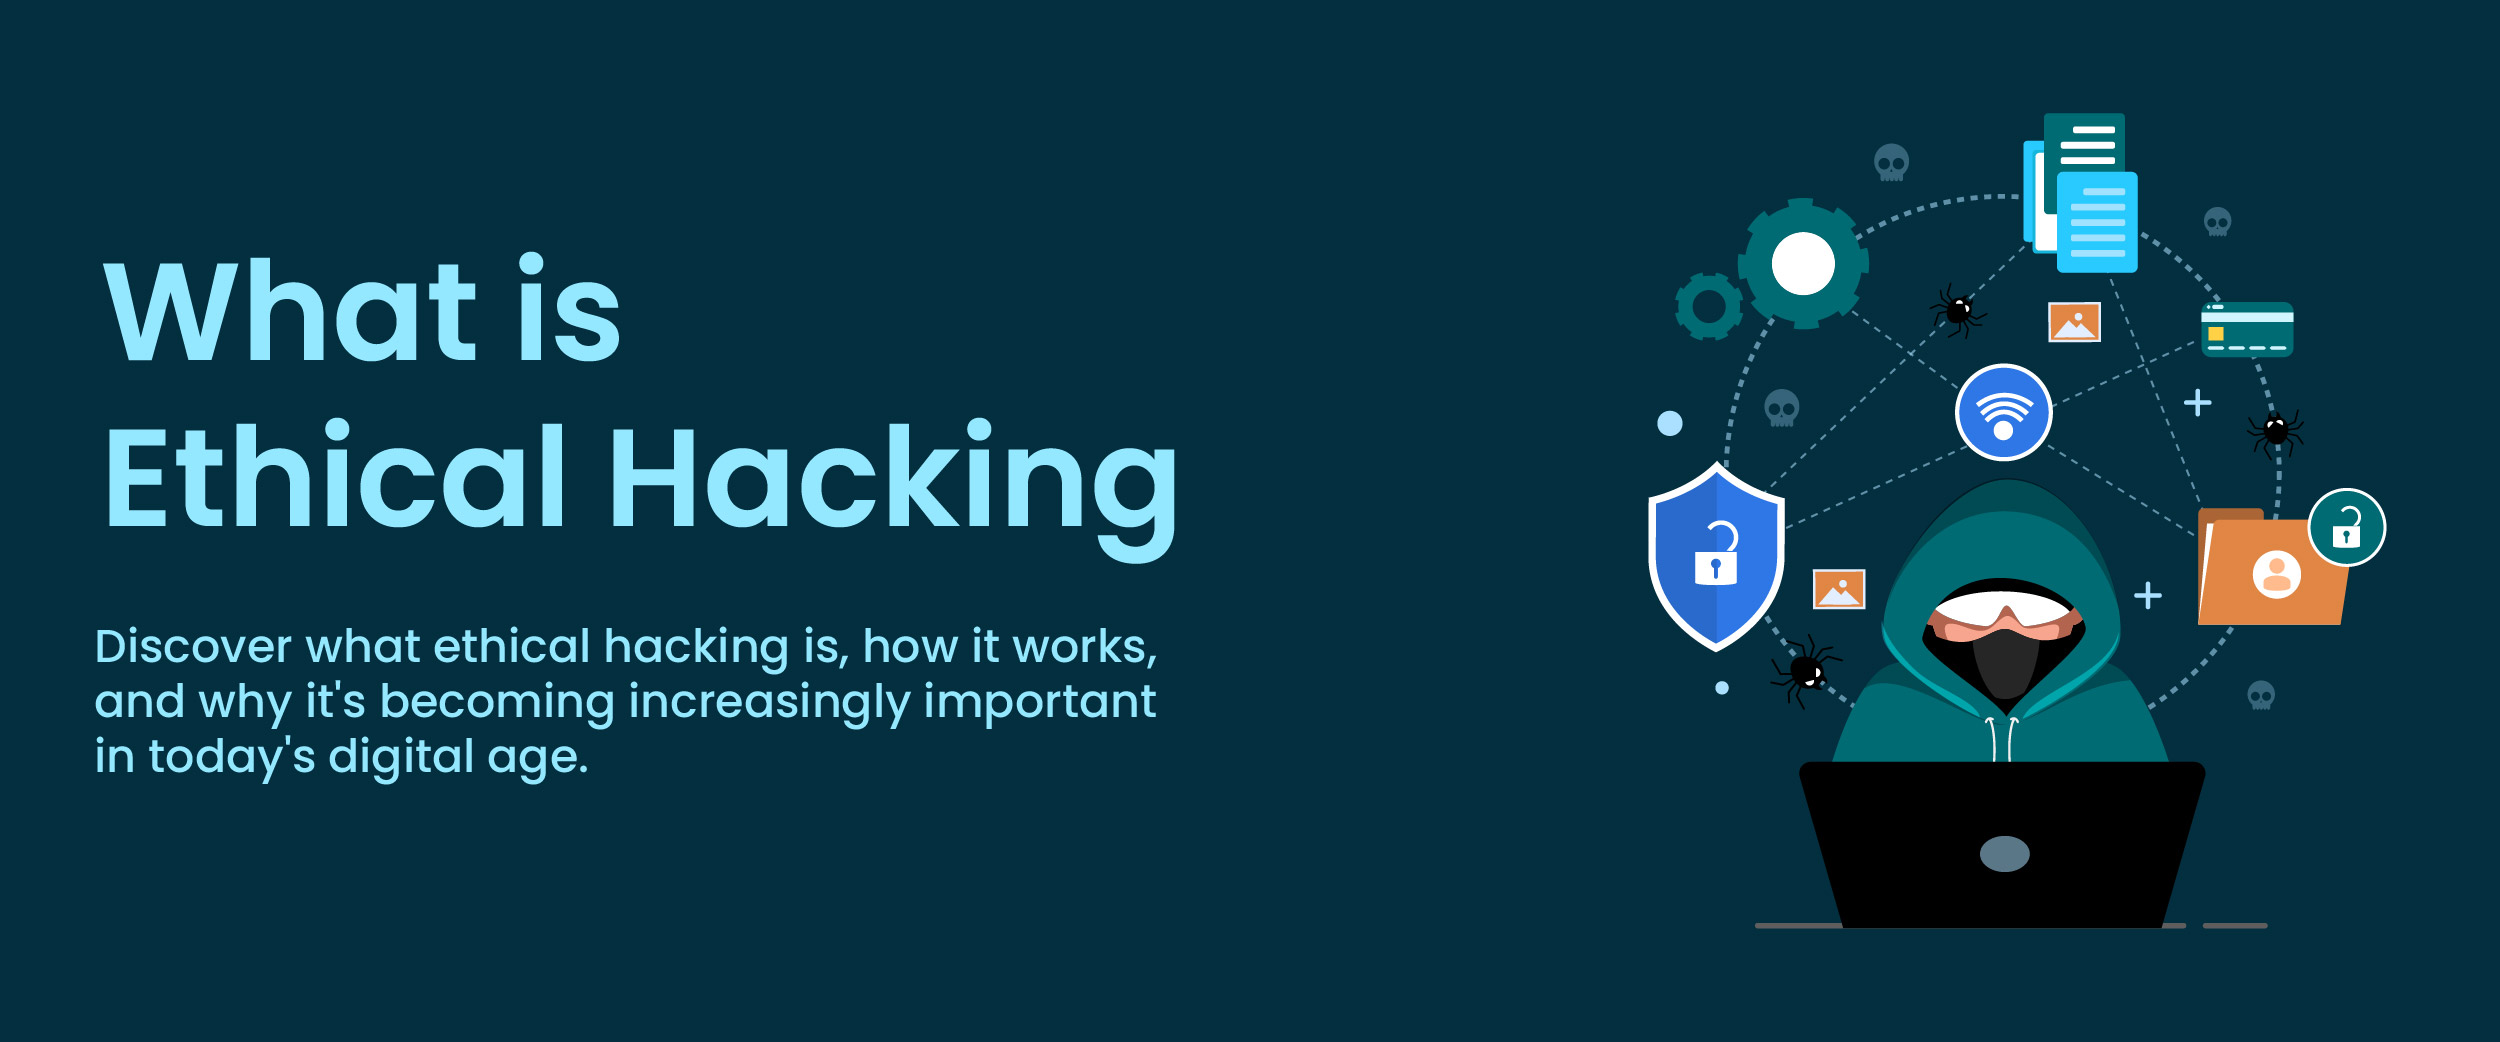 what is ethical hacking